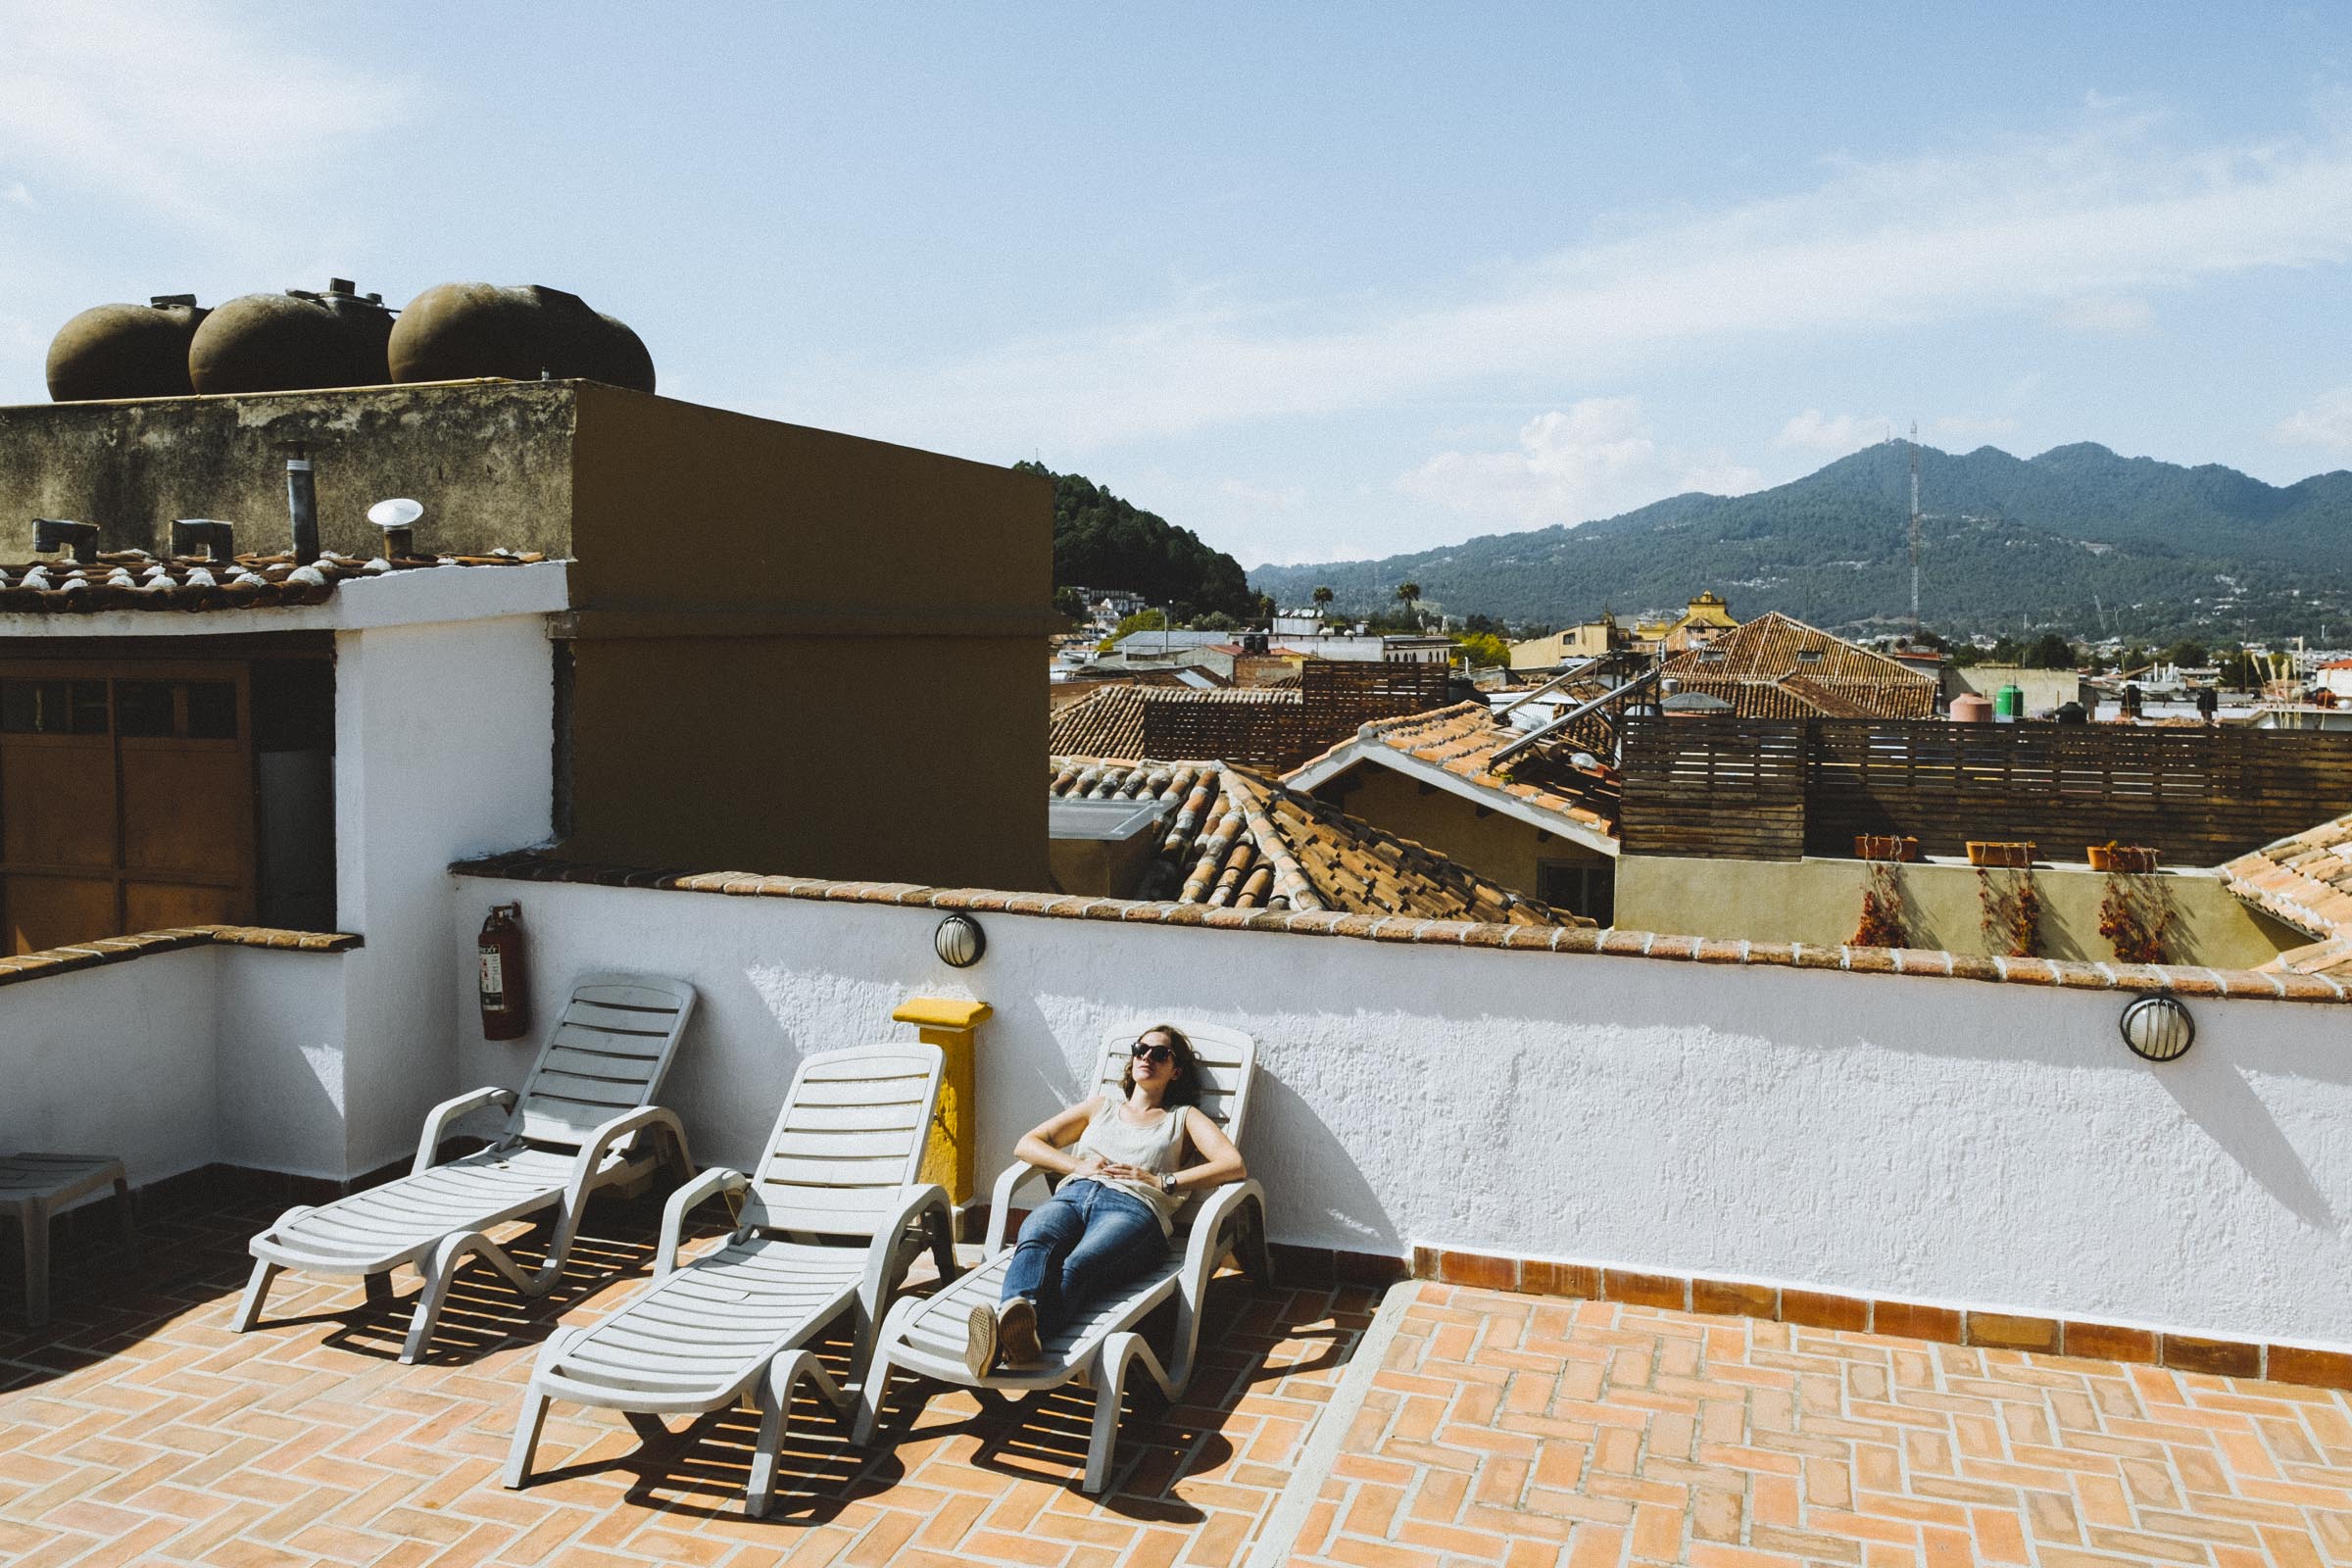 Relaxing on the rooftop of the hotel, San Cristobal